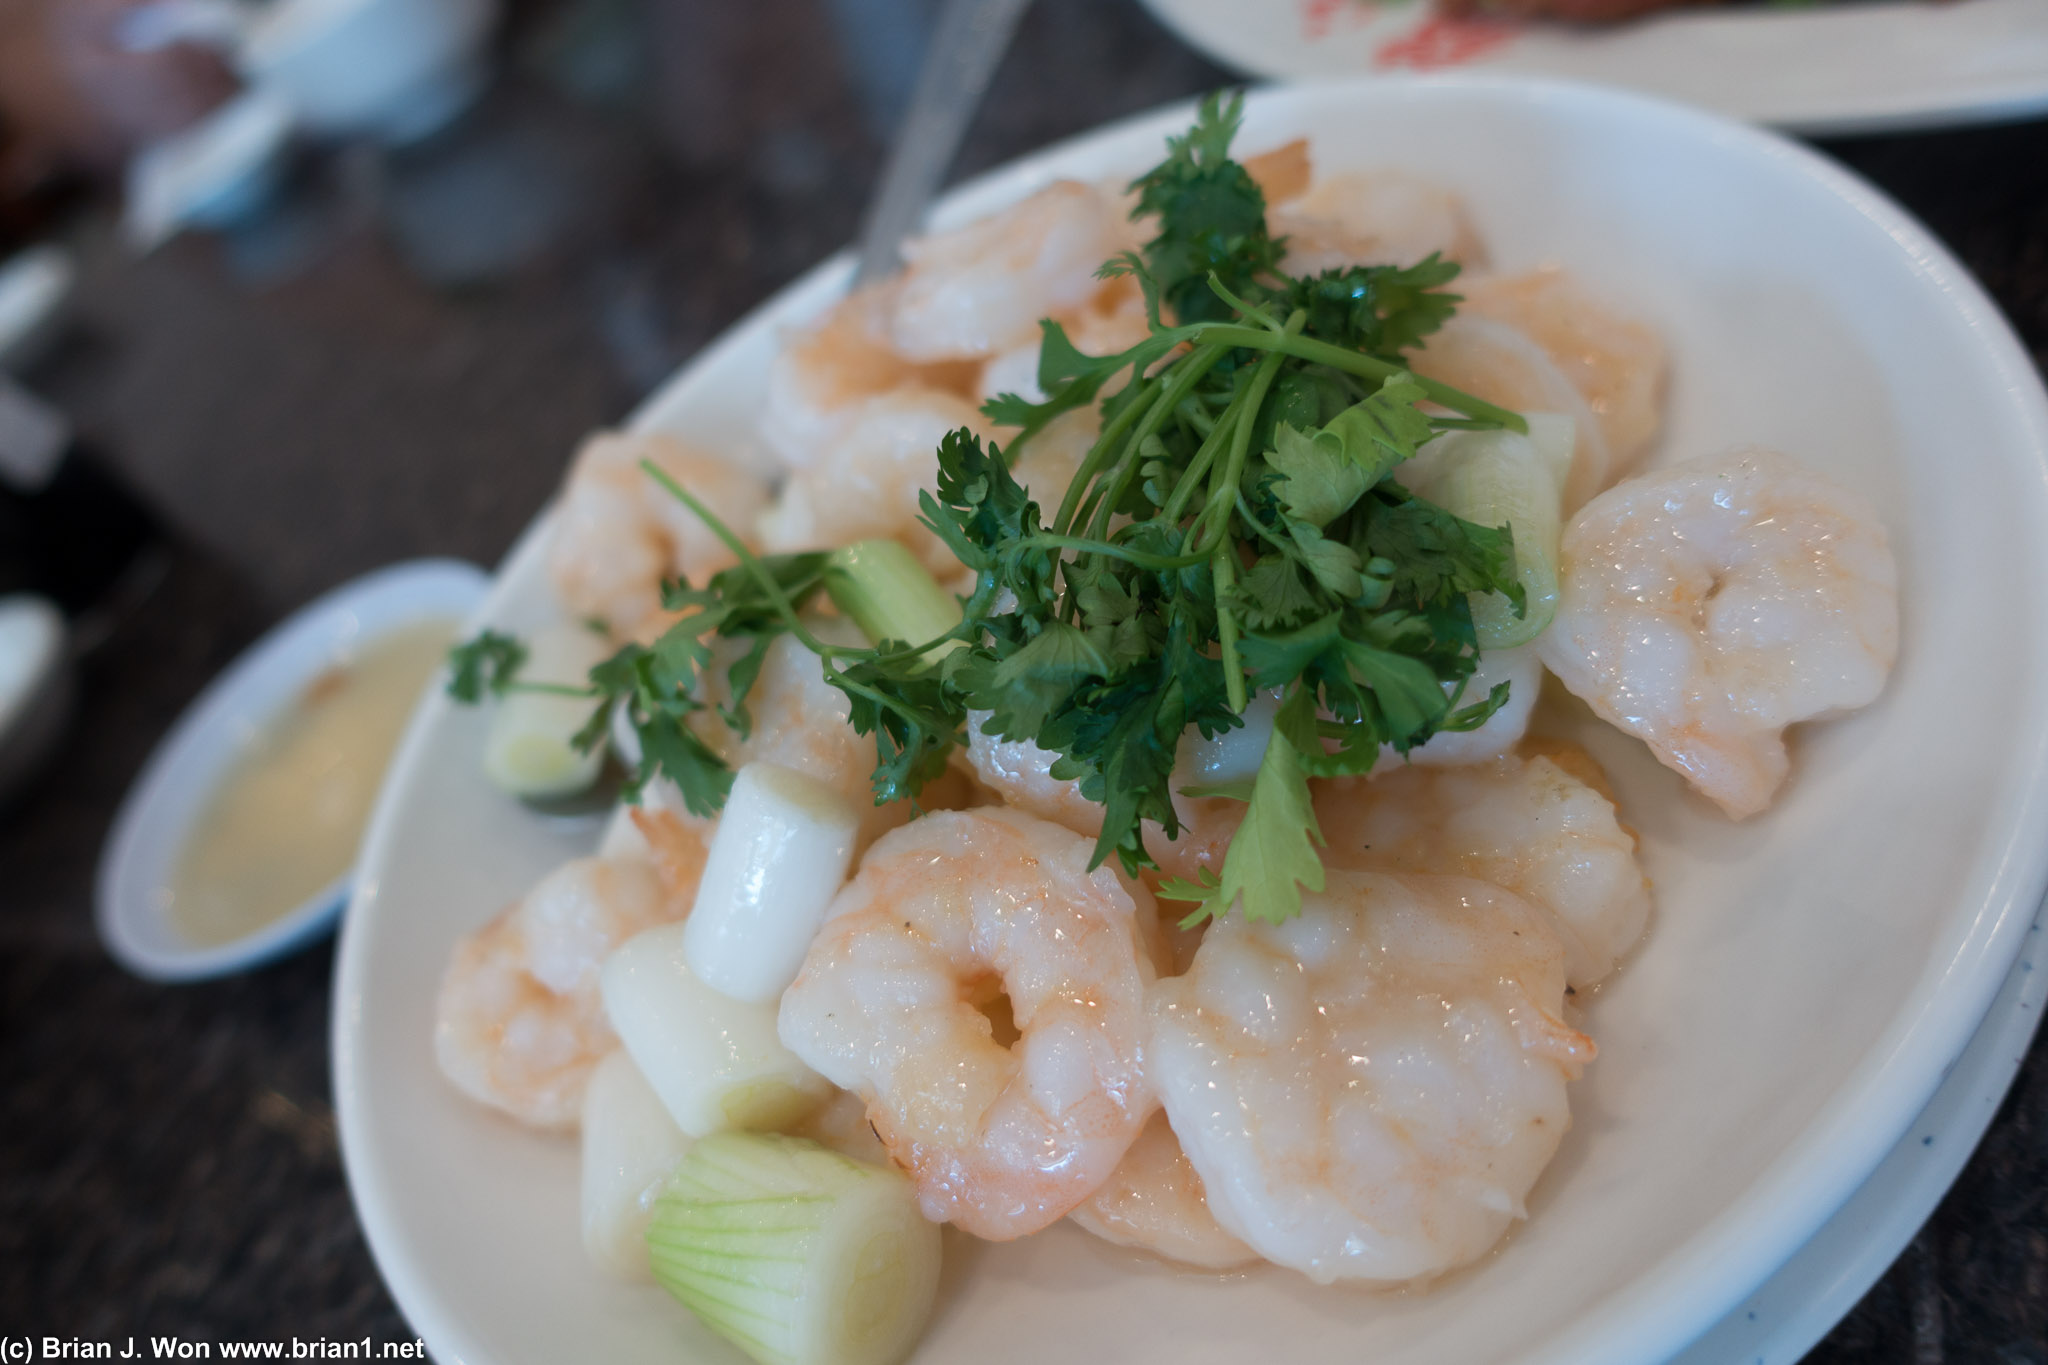 Shrimp were weird, some were fine, some were very salty. Poorly stirred during cooking perhaps?